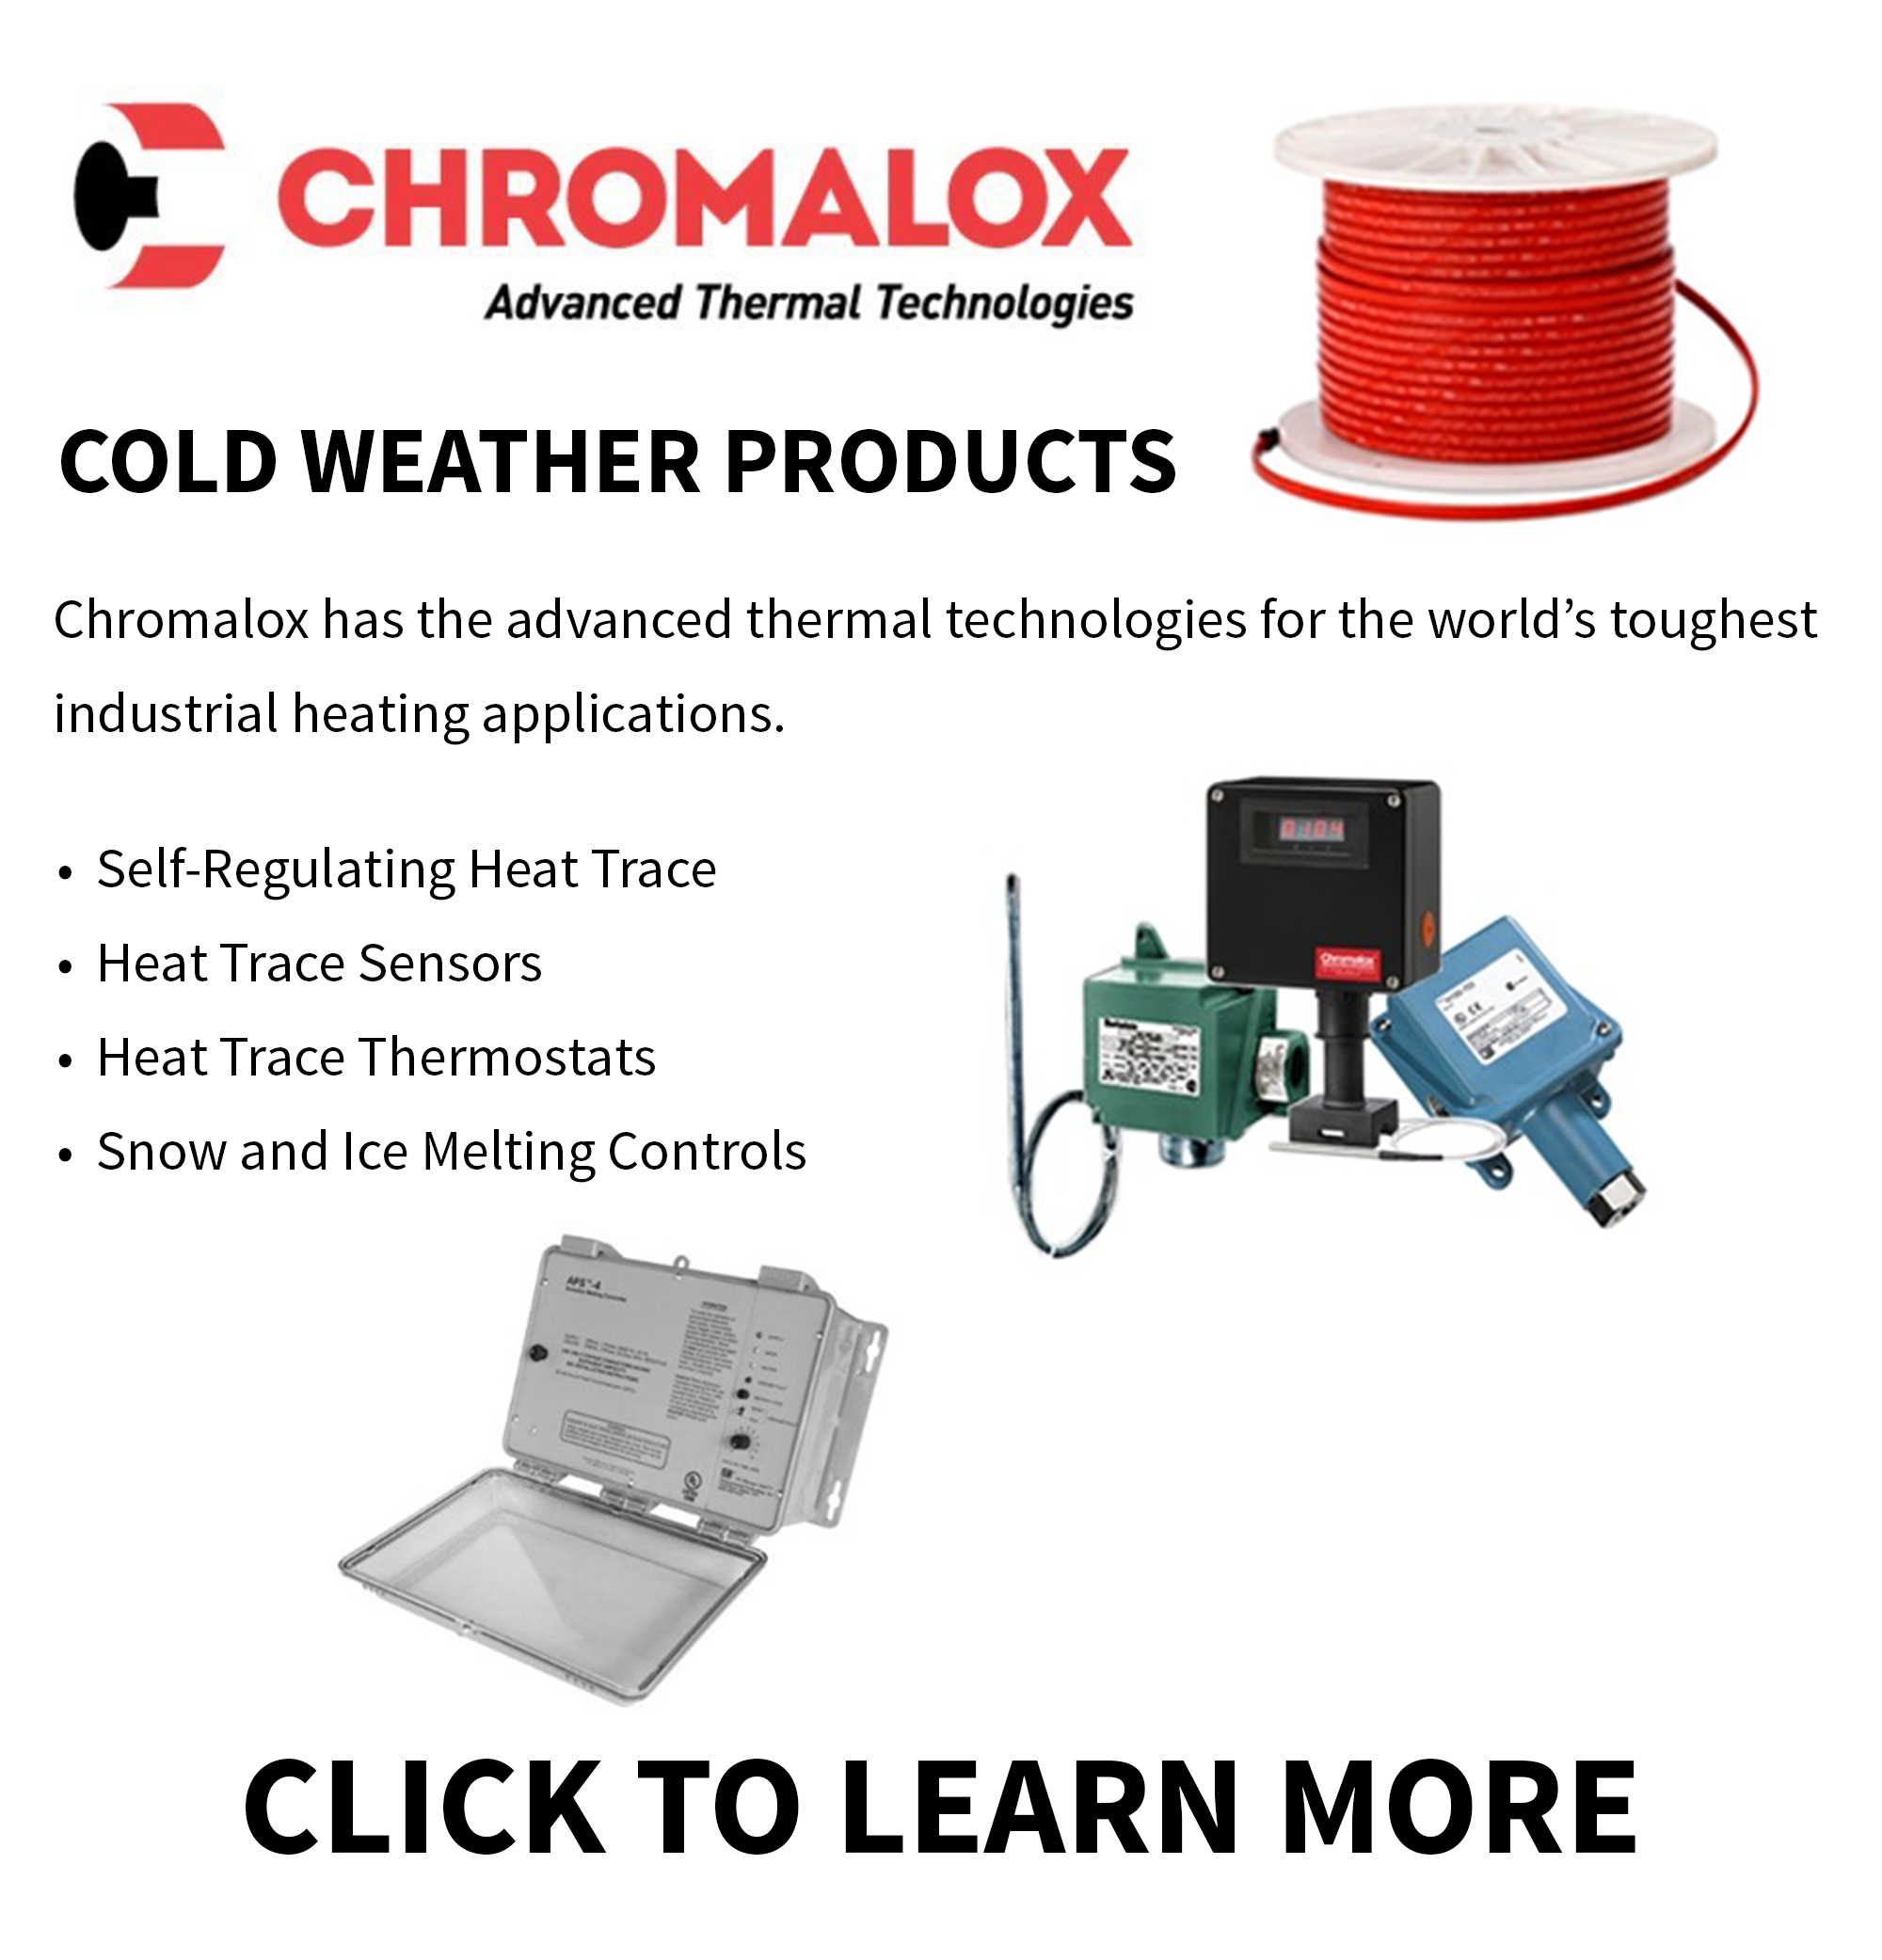 Ohio Valley Industrial Services- Chromalox Cold Weather Products